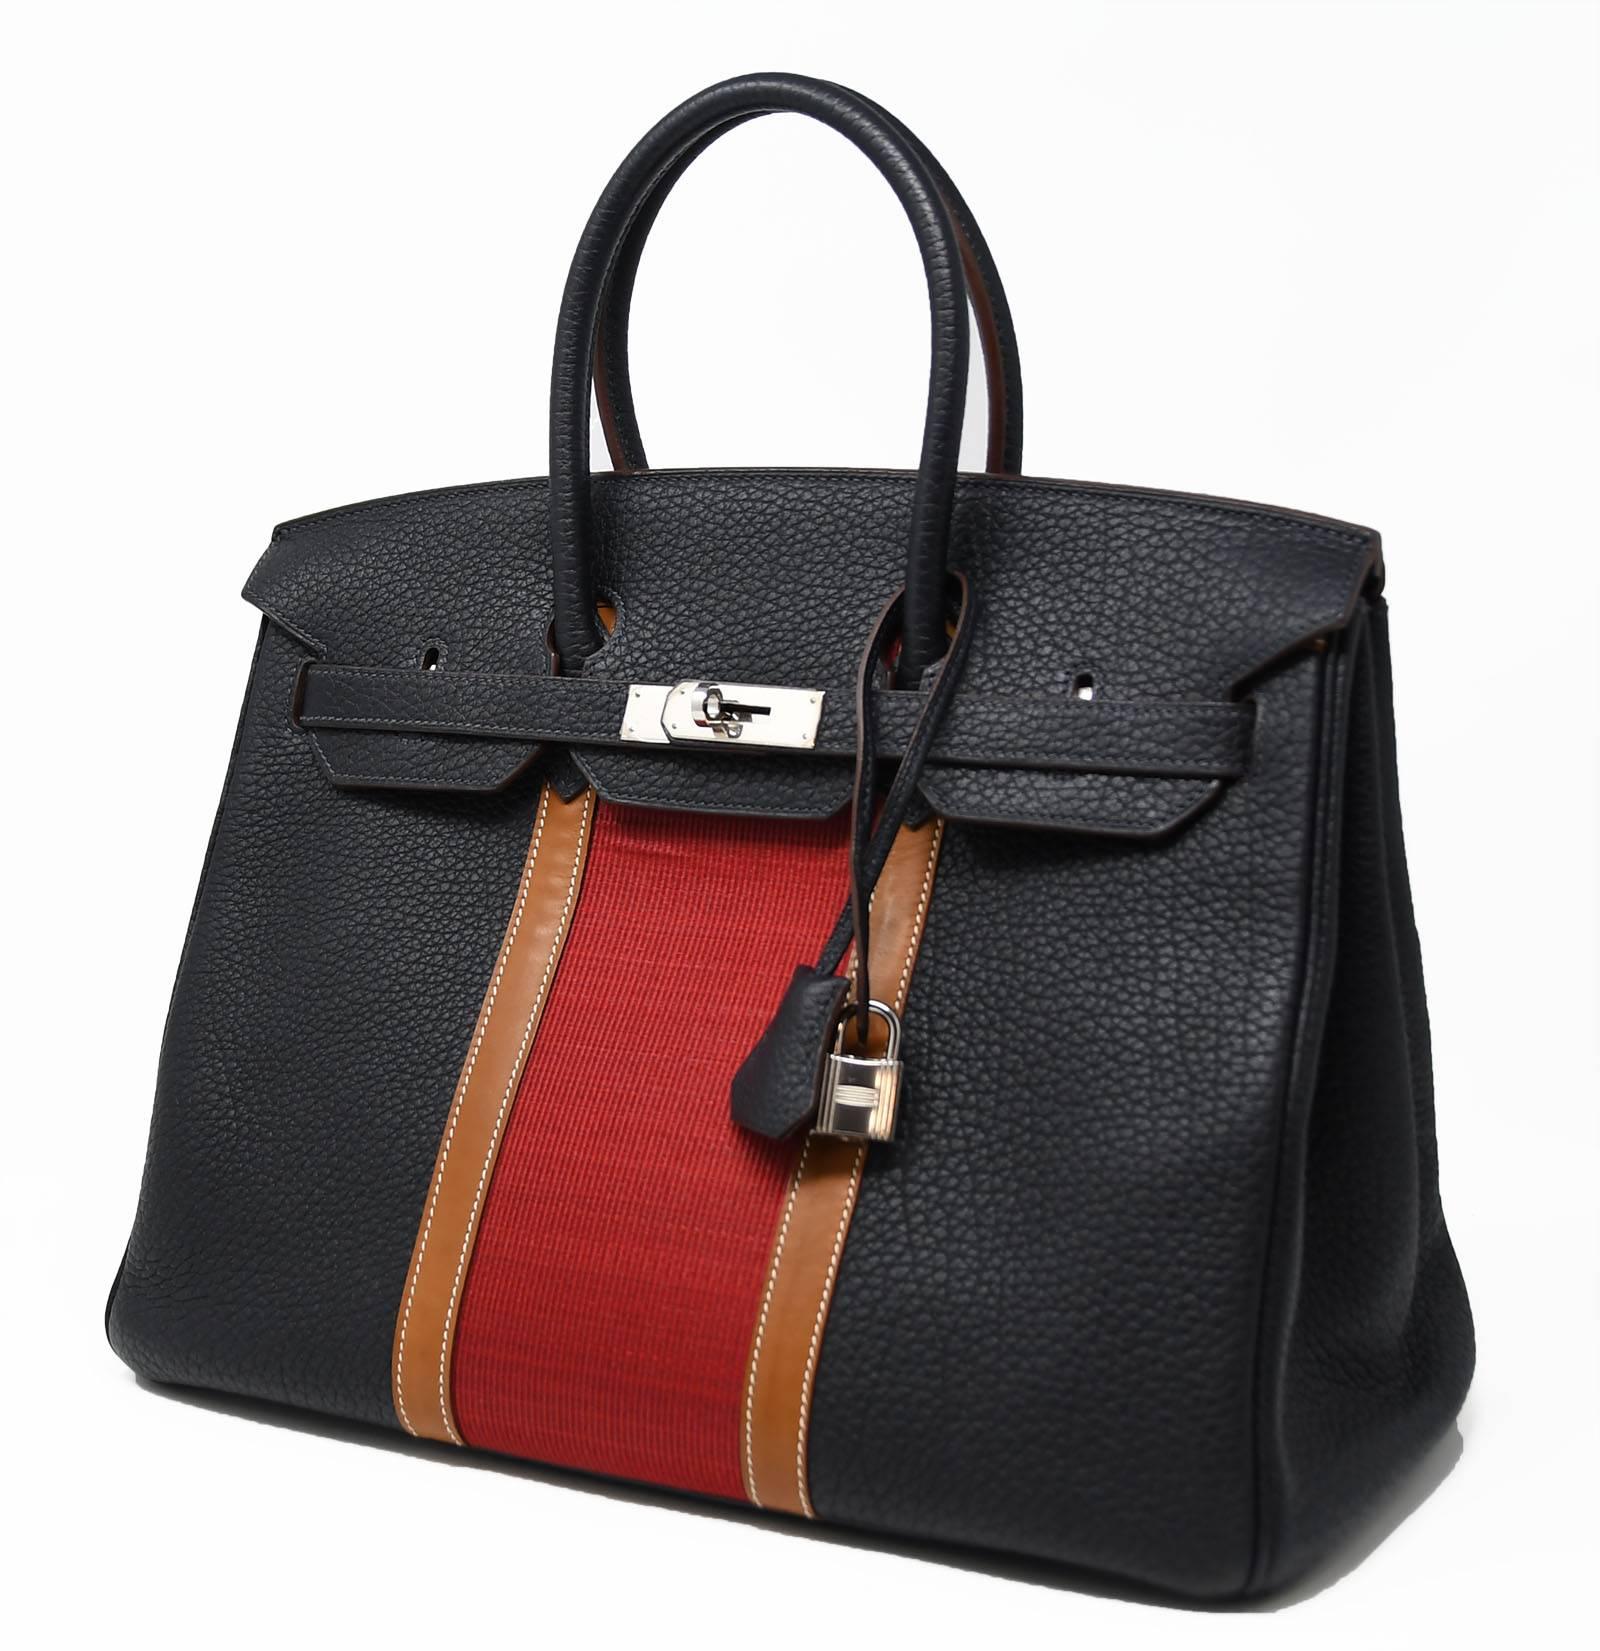 This tricolor Birkin bag is certainly a rare and coveted find.  A beautiful red stripe contrasts the black and tan leather.  Brand new with plastic on the hardware, this bag comes with the original dust cover.